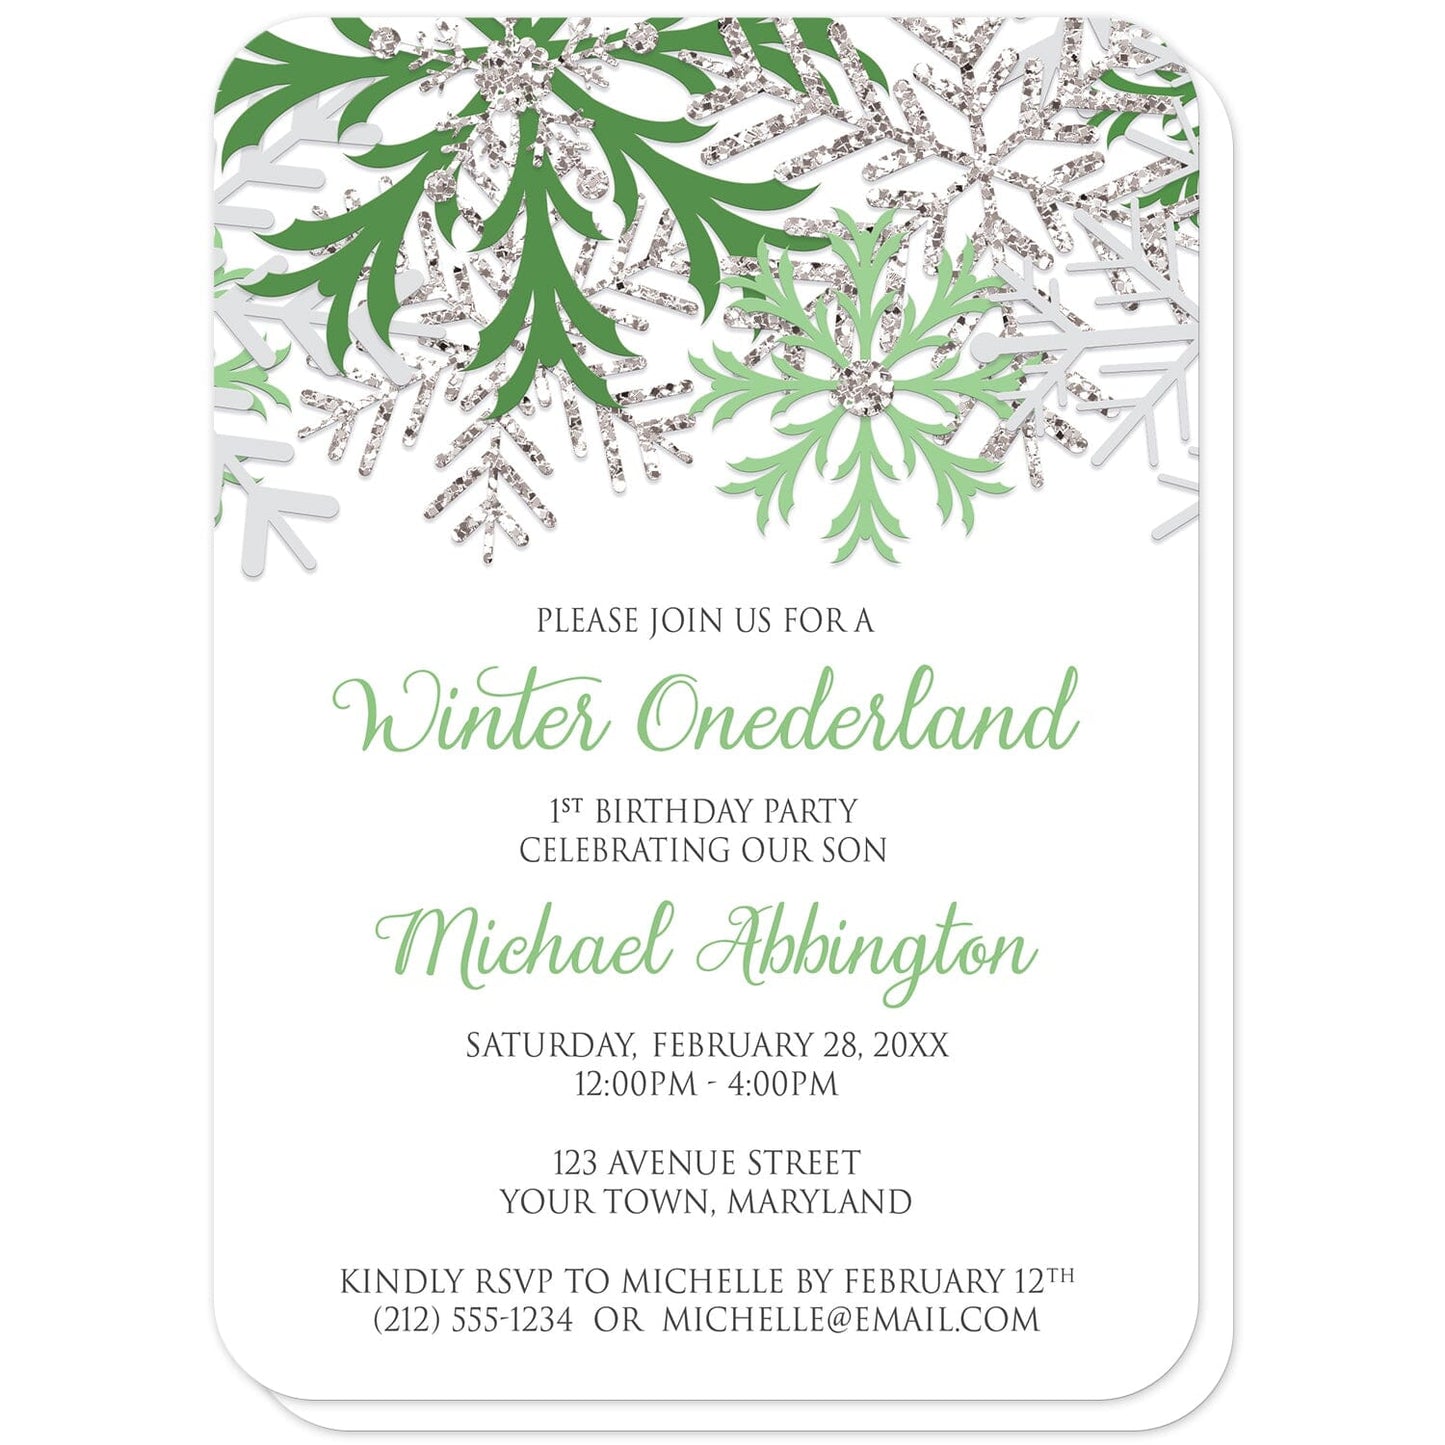 Green Silver Snowflake 1st Birthday Winter Onederland Invitations (with rounded corners) at Artistically Invited. Pretty green silver snowflake 1st birthday Winter Onederland invitations designed with green, light green, silver-colored glitter-illustrated, and light gray snowflakes along the top of the invitations. Your personalized 1st birthday party details are custom printed in green and gray on white below the snowflakes.